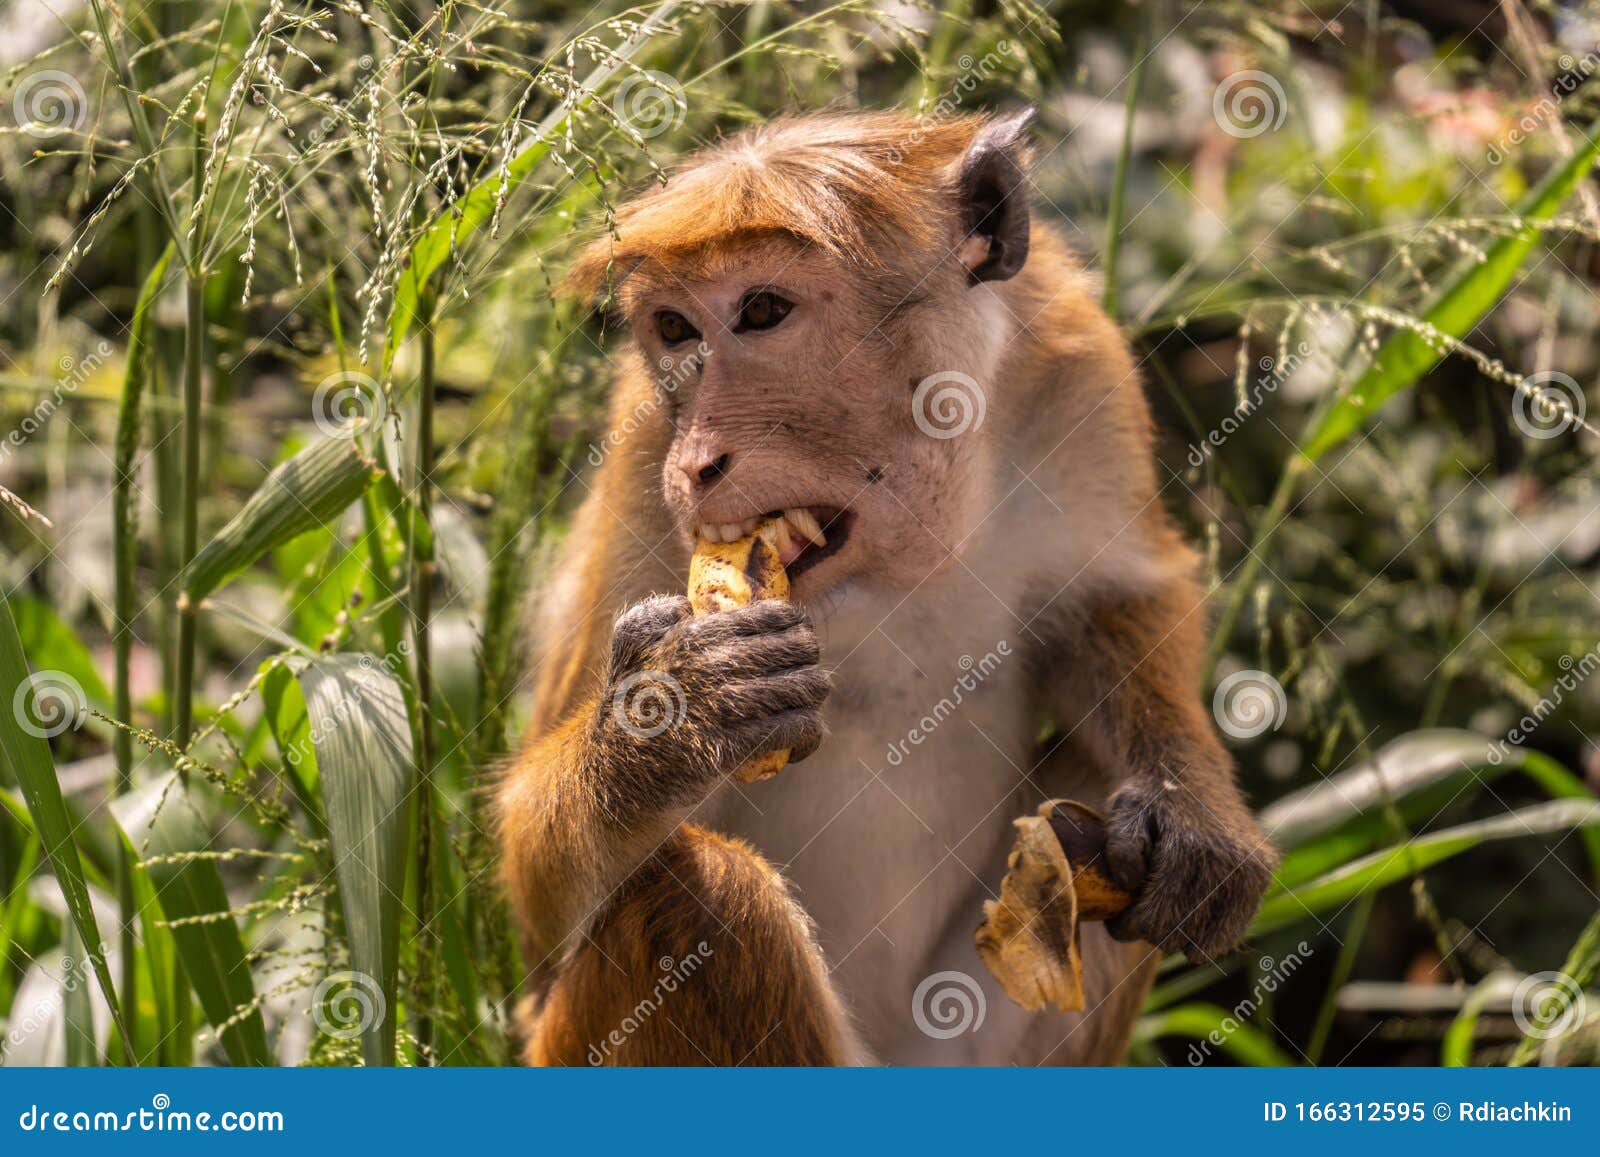 Red-haired Monkey with a Funny Hairstyle Eats a Banana Stock Image - Image  of banana, fist: 166312595